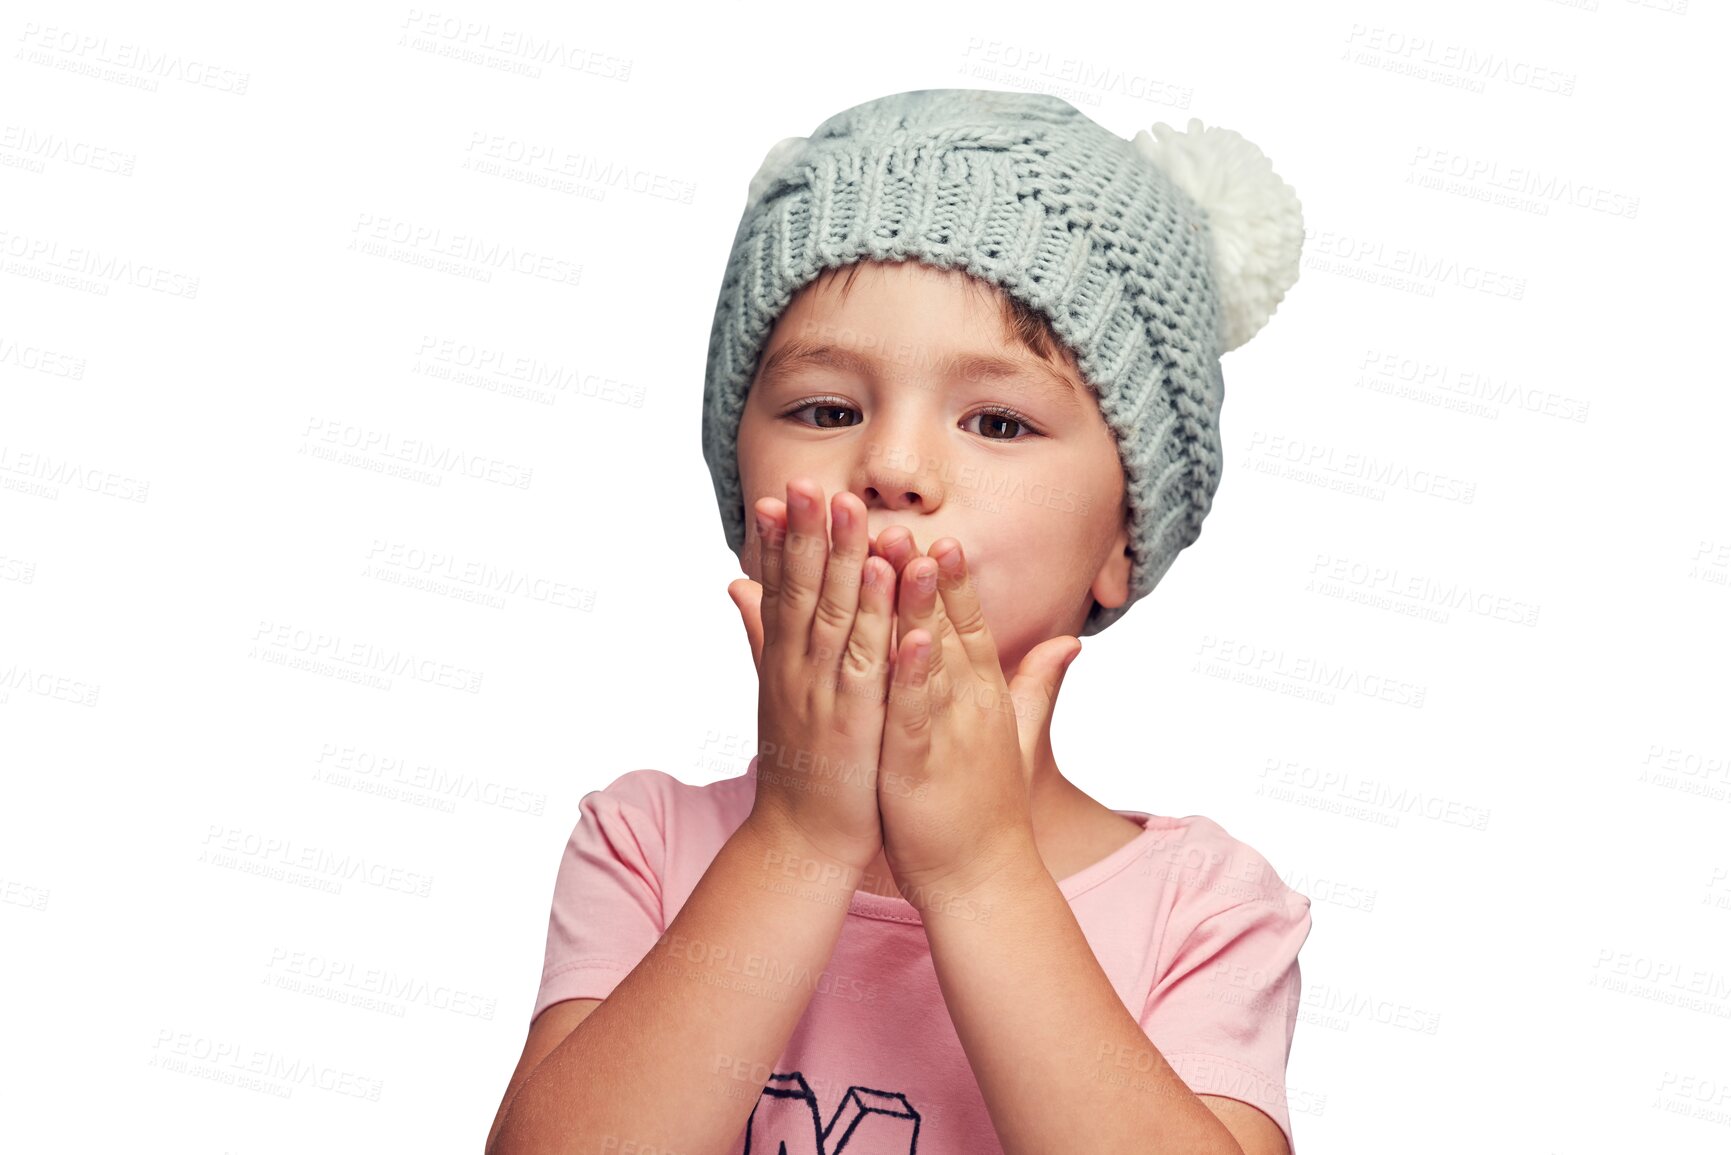 Buy stock photo Blowing, kiss and portrait of child with love and care in transparent, isolated or png background. Hands, gesture and kid on Valentines day with romance, support and emoji of kindness or compassion